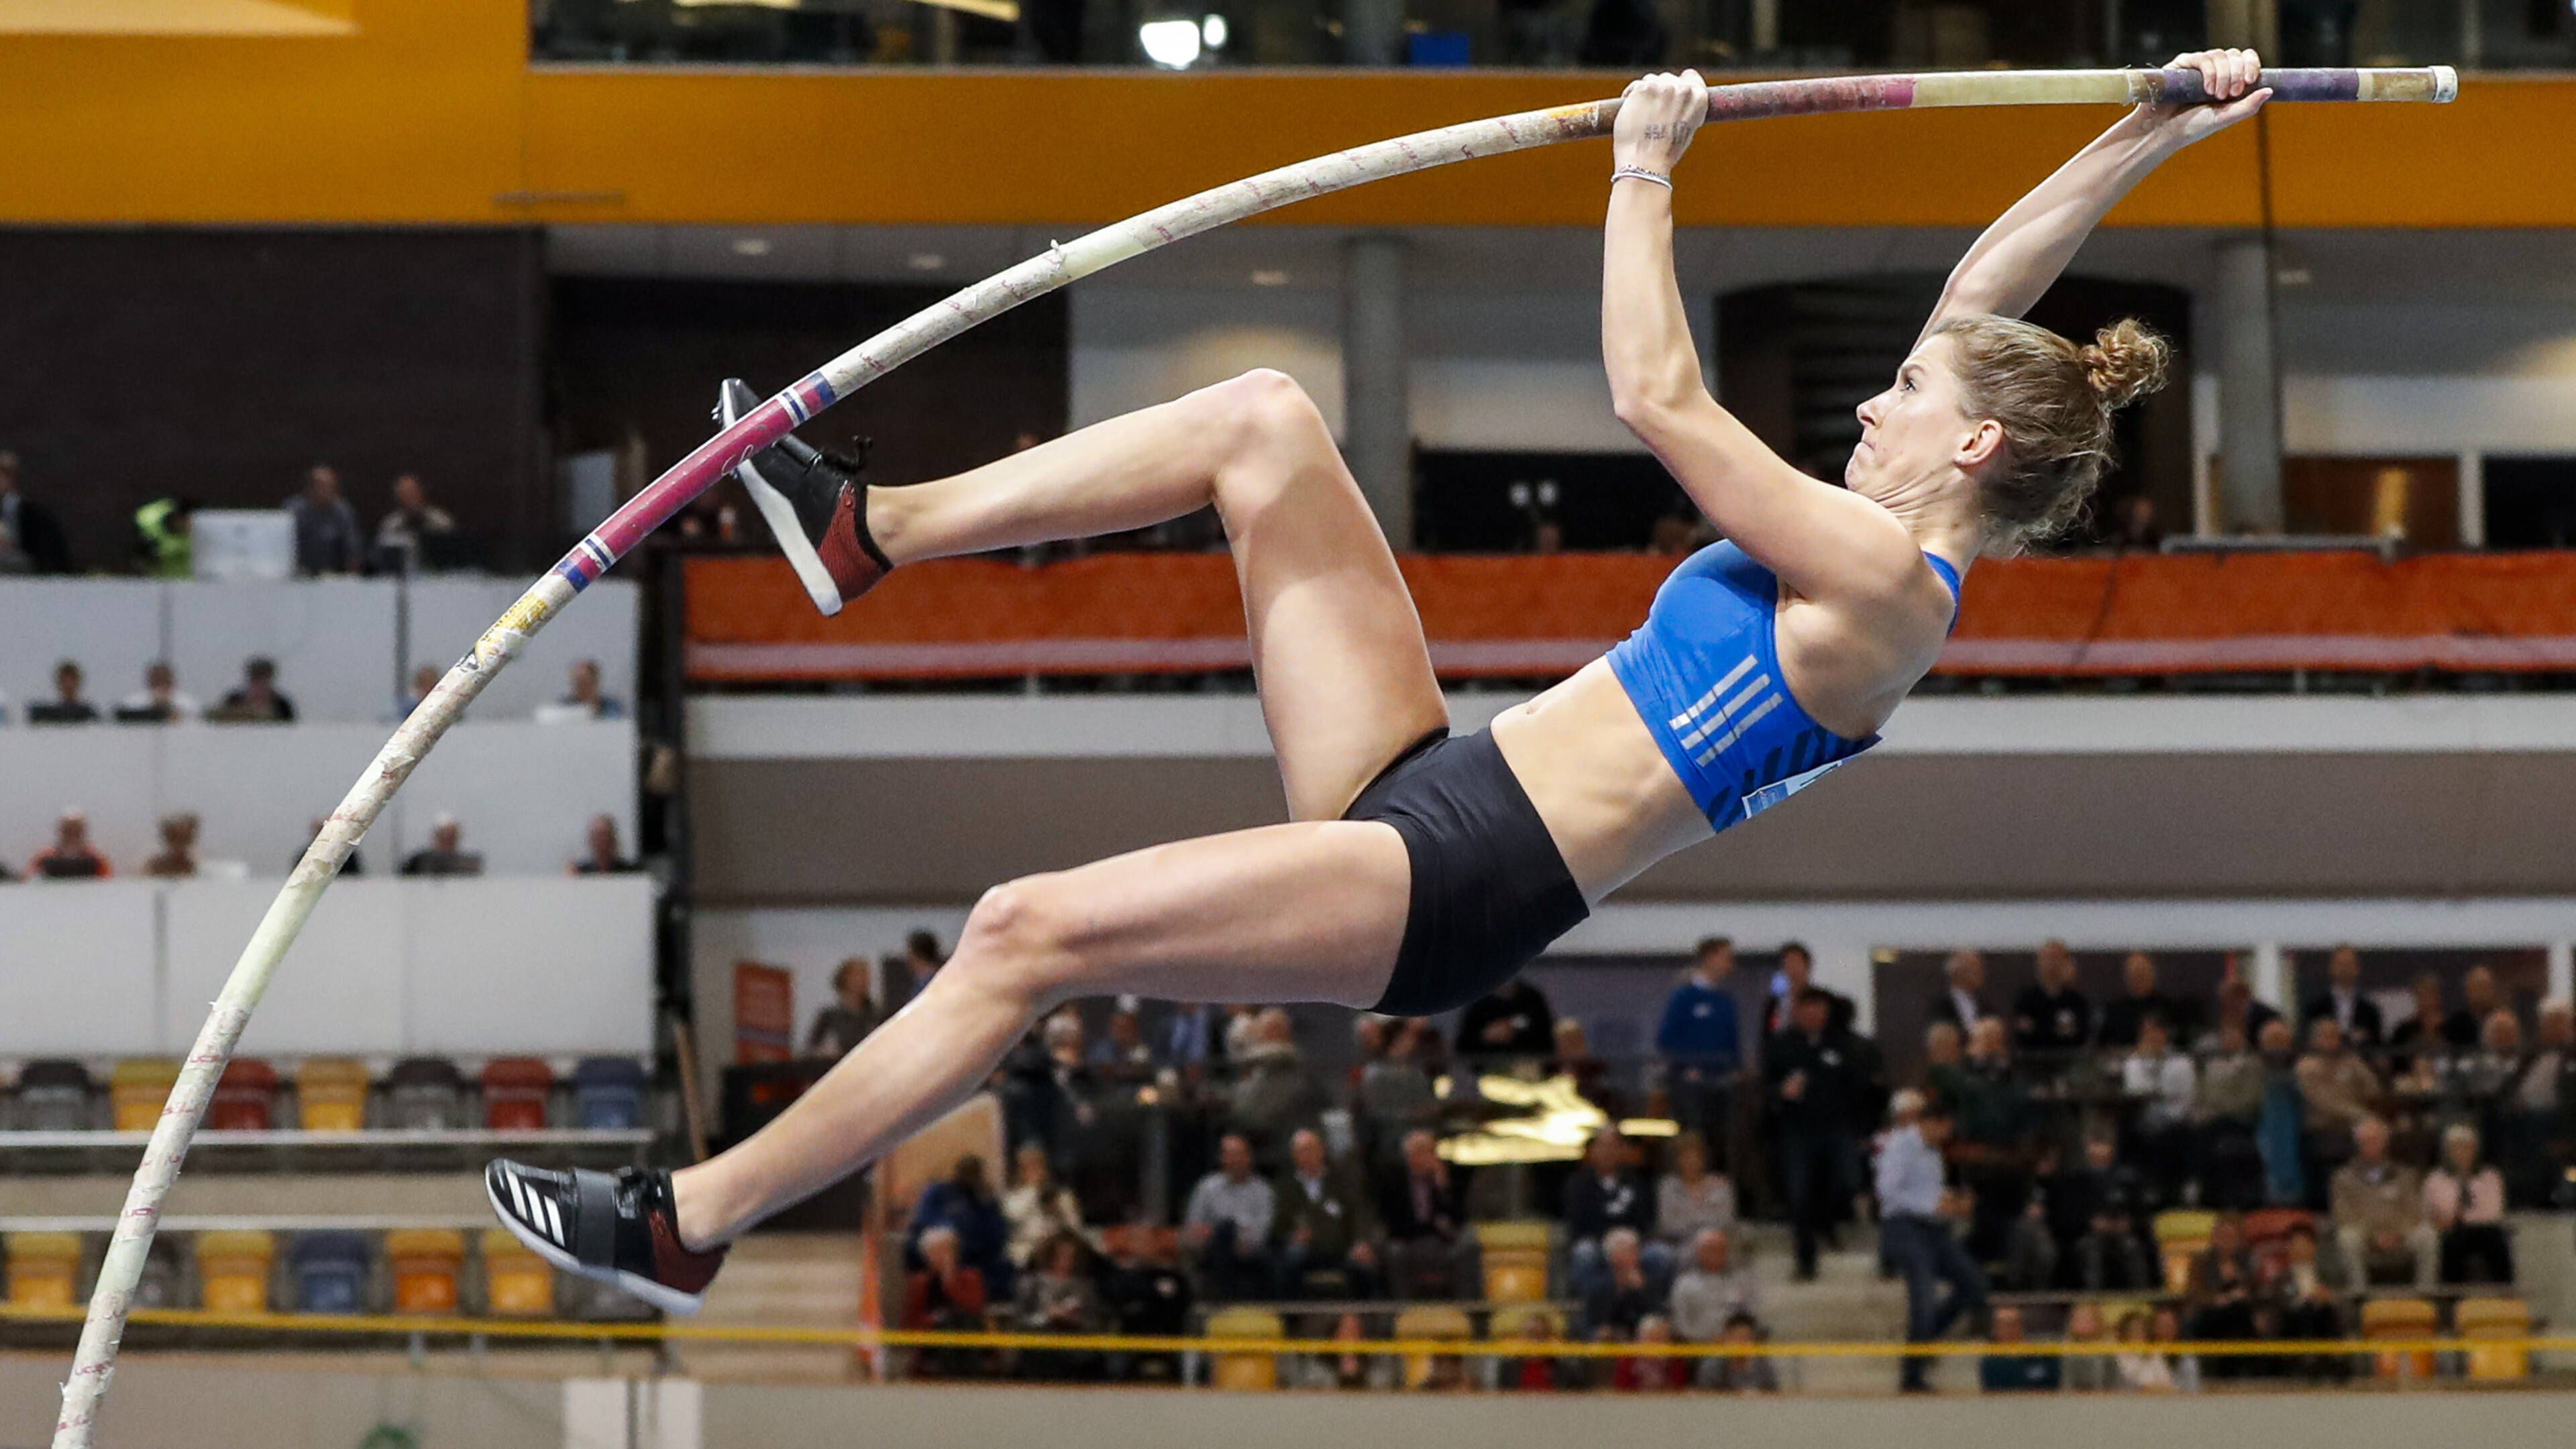 Pole Vaulting: Femke Pluim, Nederlands record, A field event consisting of a leap for height over a crossbar. 3840x2160 4K Wallpaper.